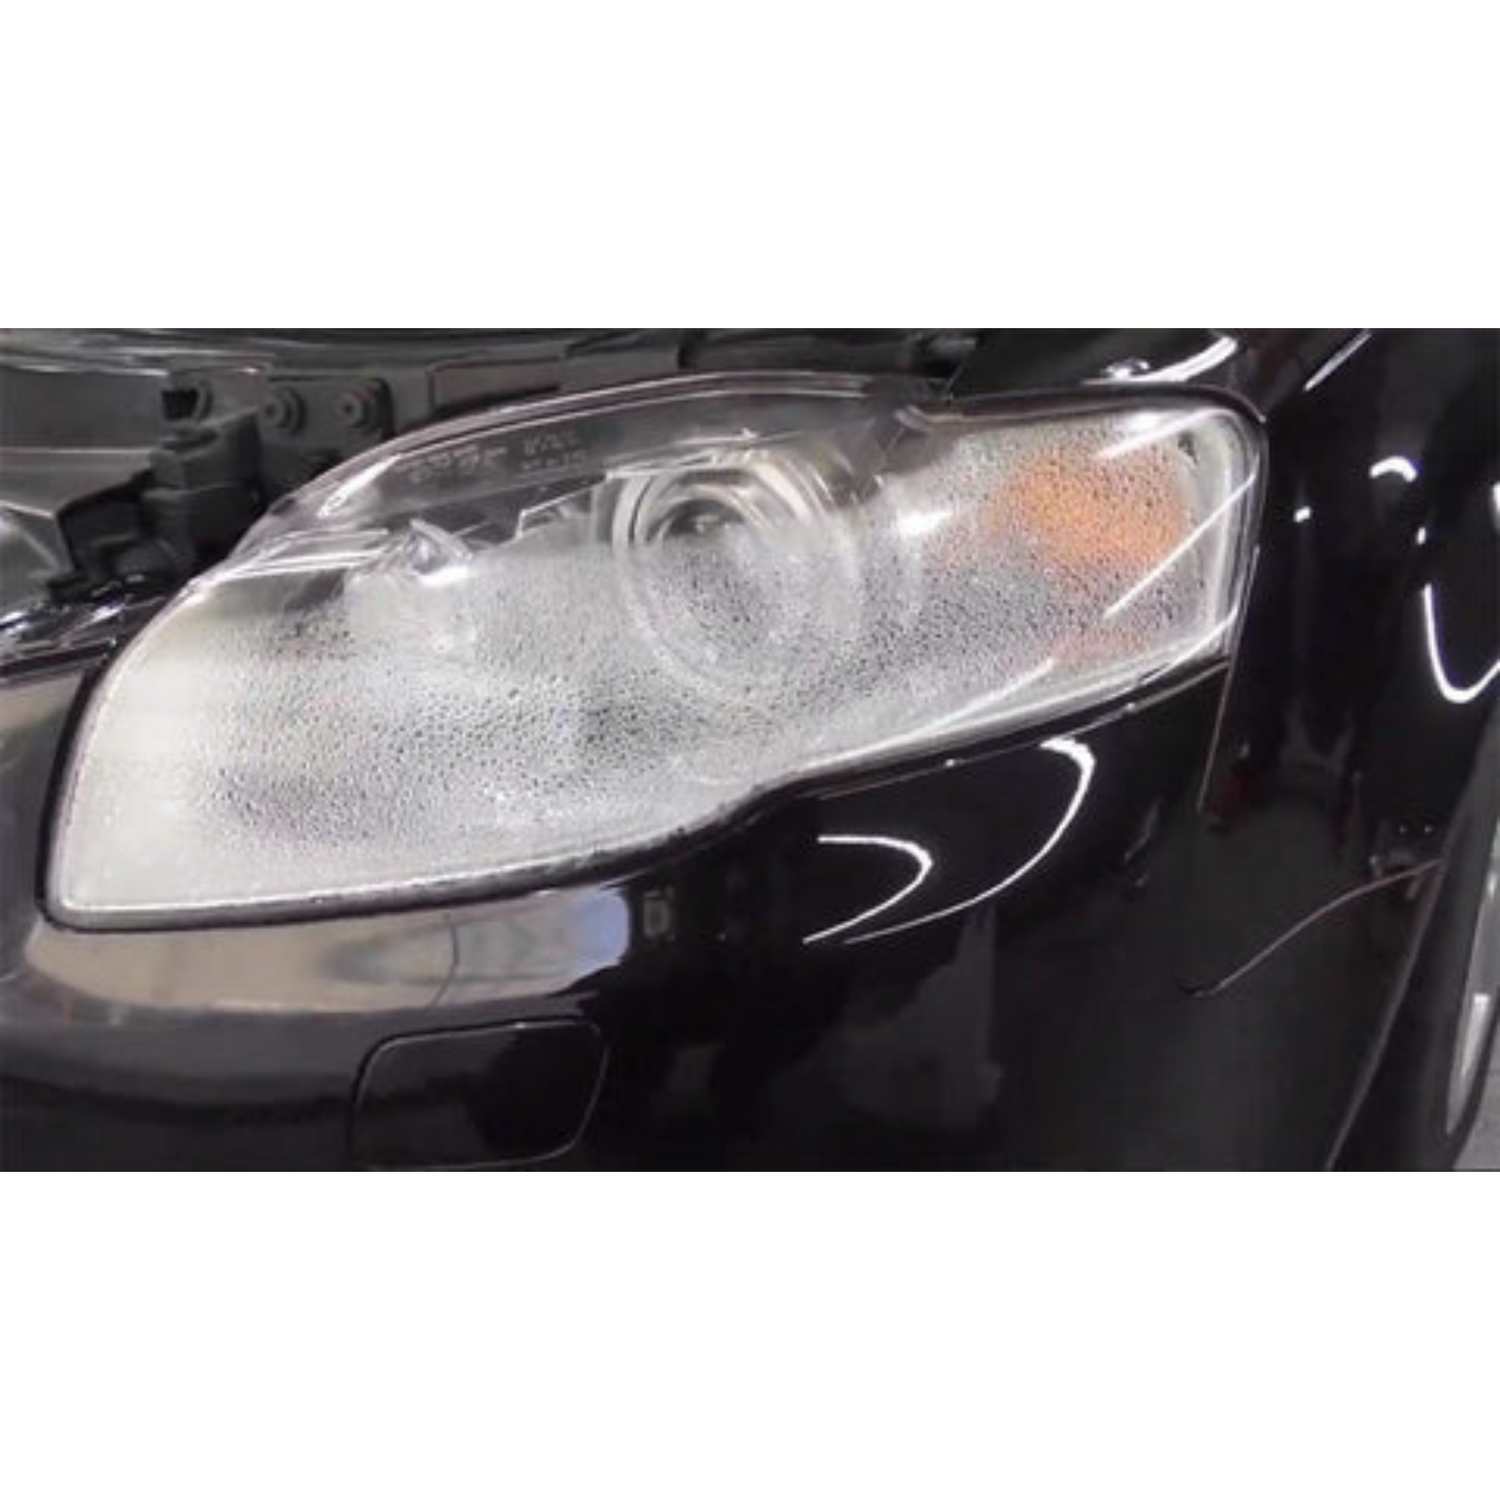 Removing Moisture / Condensation from Headlights